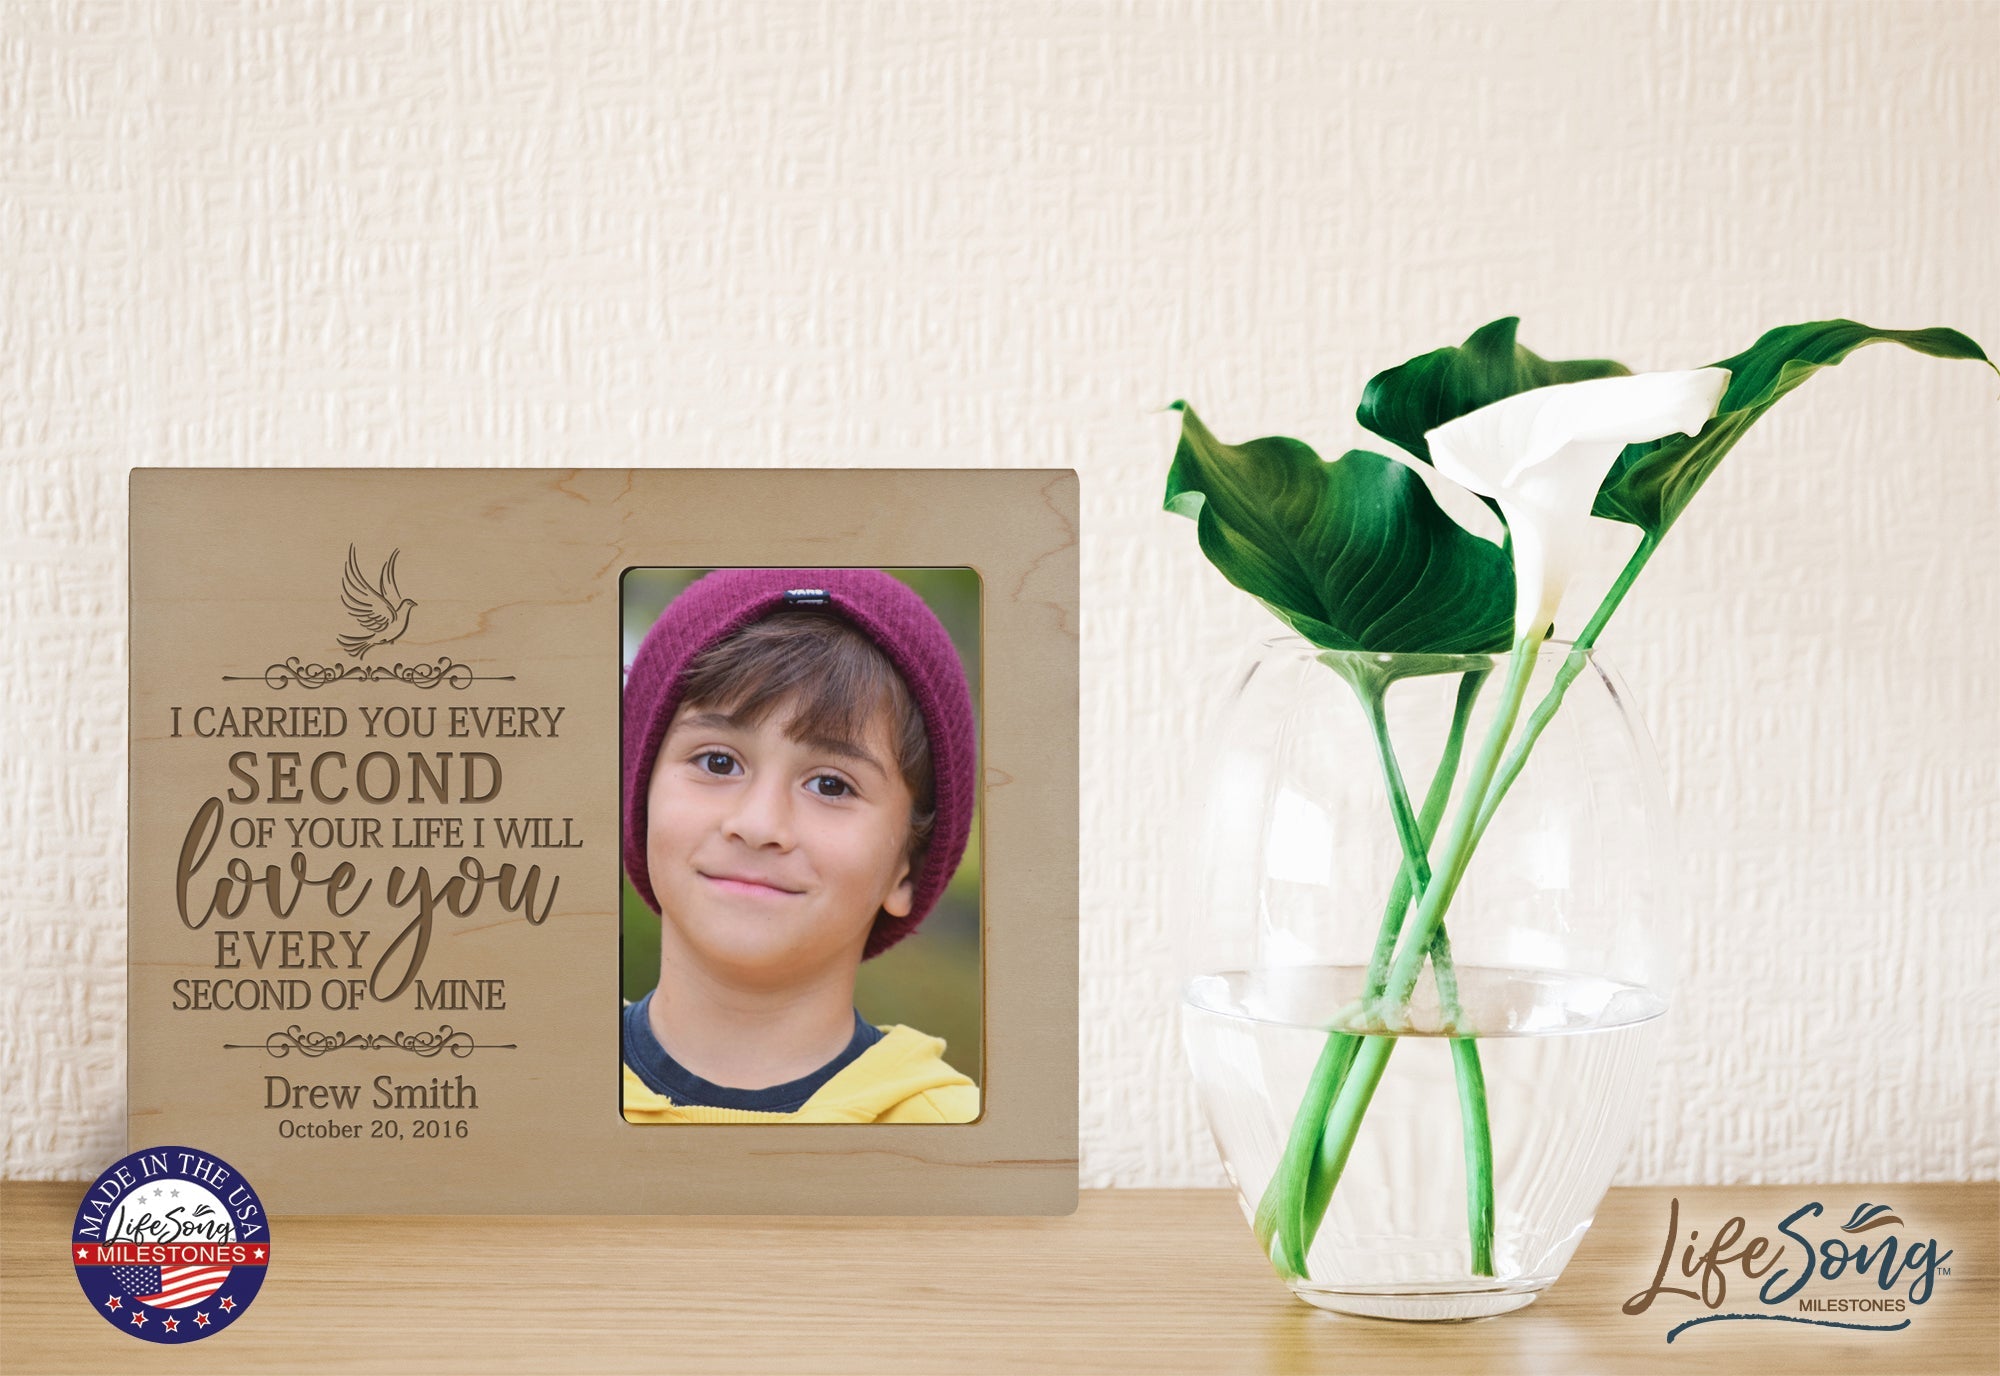 Personalized Wooden Memorial 8x10 Picture Frame holds 4x6 photo I Carried You Every Second 2 - LifeSong Milestones